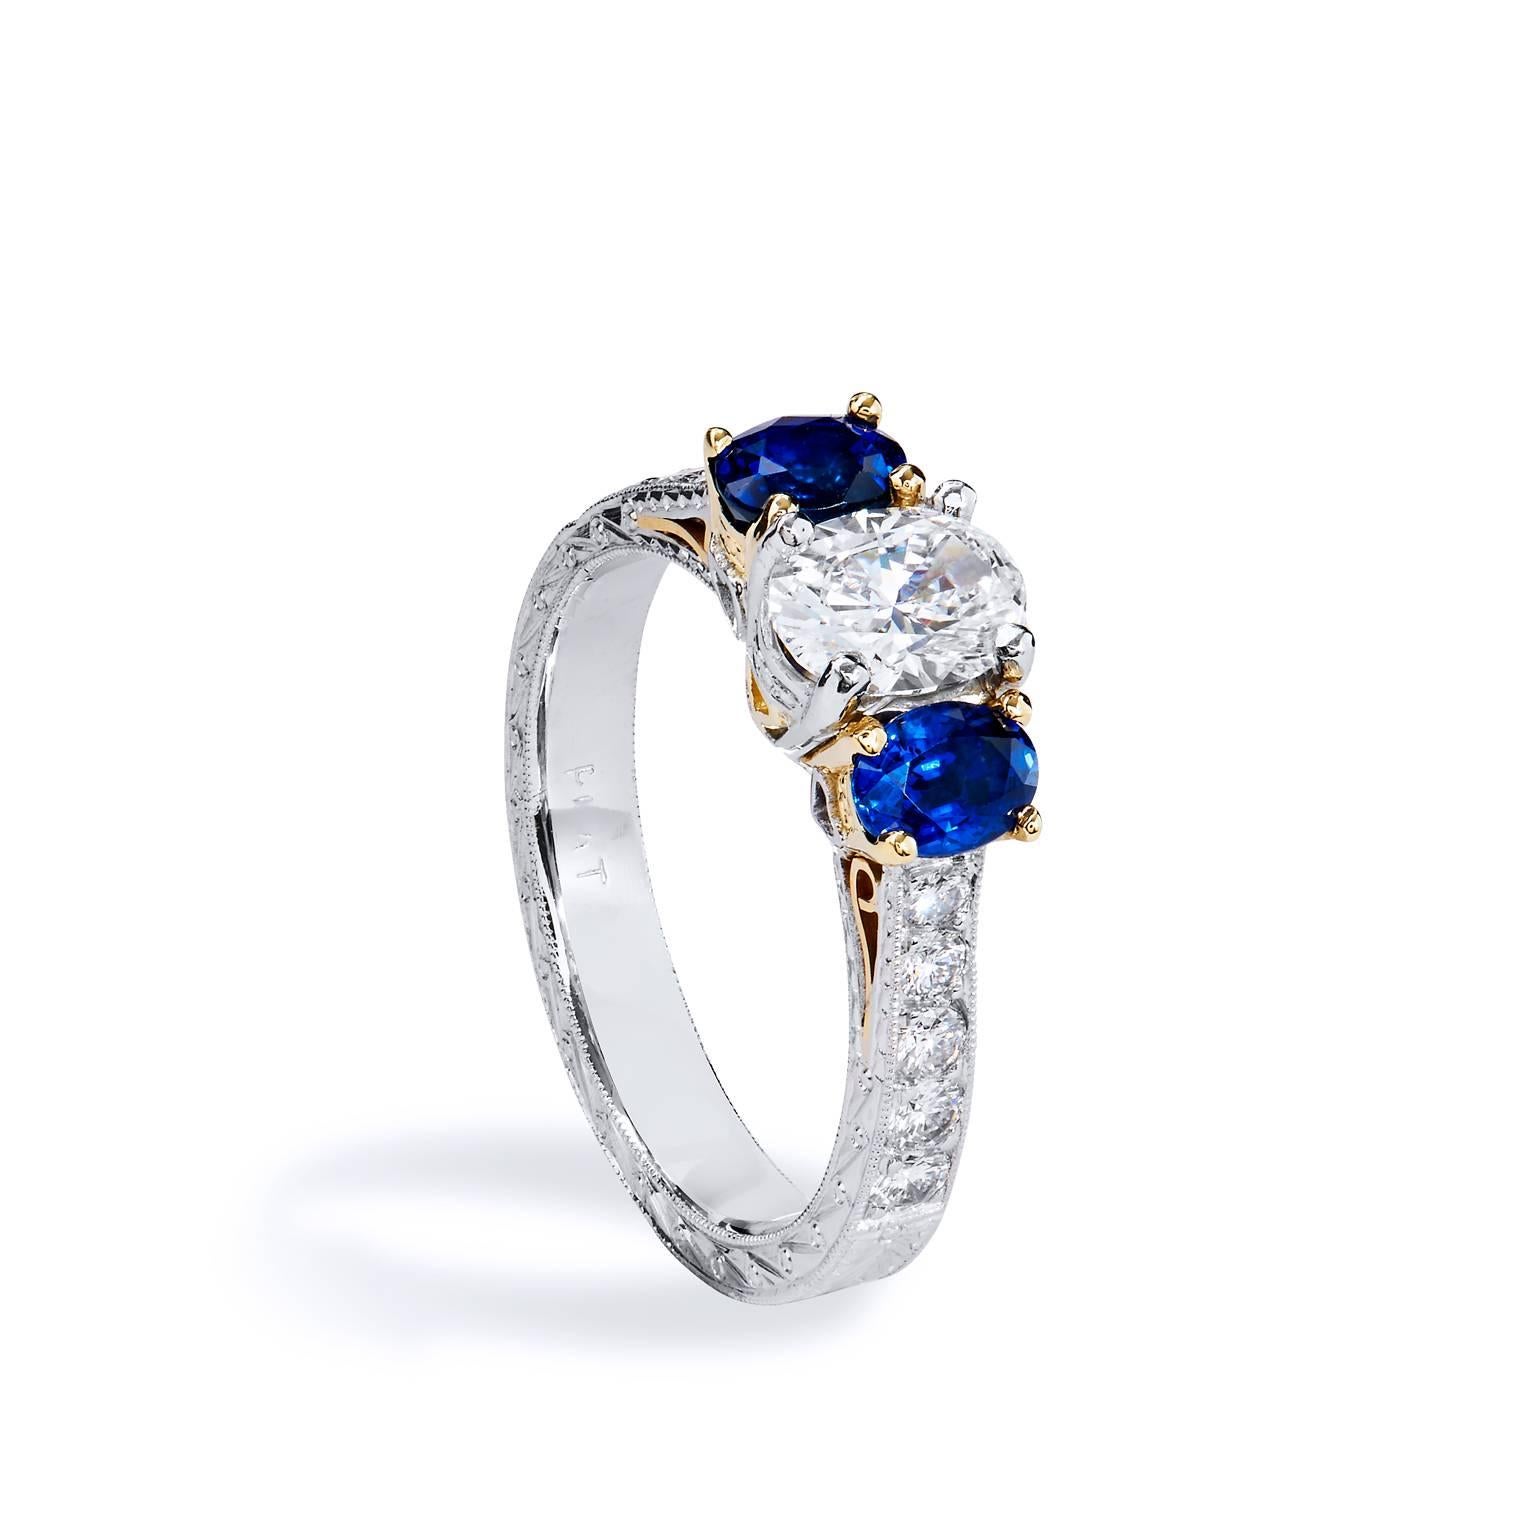 Women's Platinum and 18kt Yellow Gold GIA Certified Diamond and Sapphire Ring